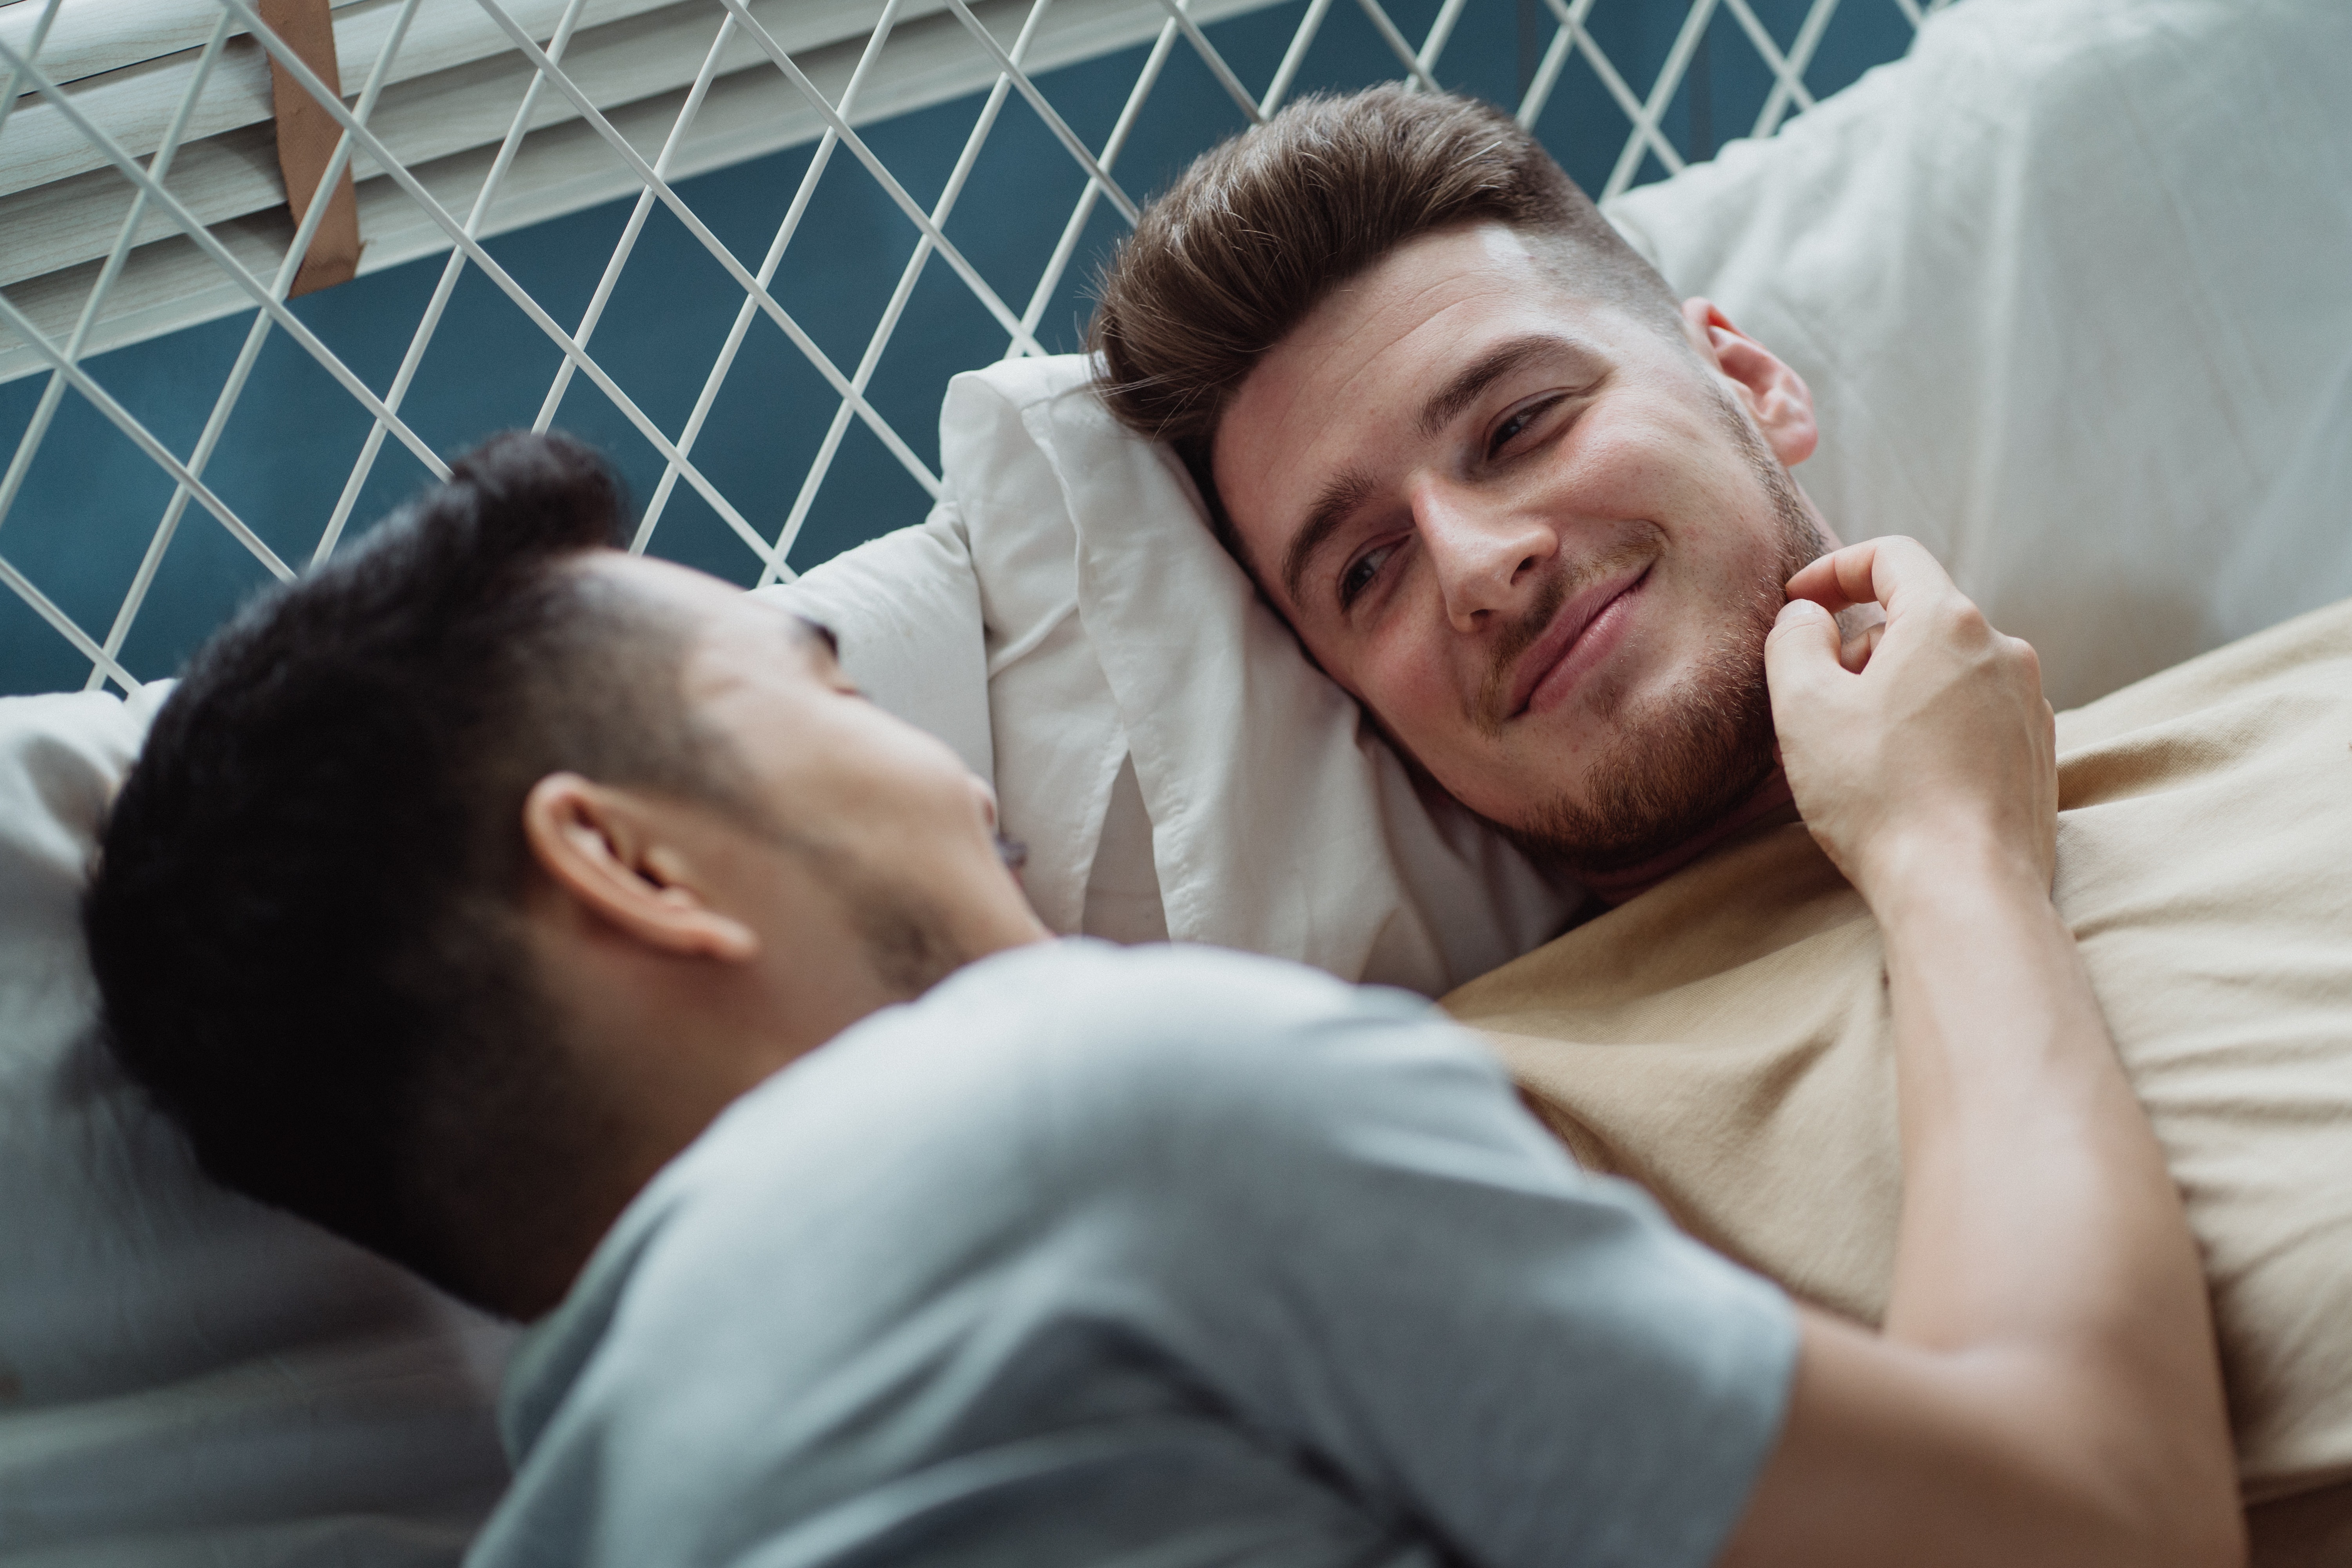 Two young men lying in bed together, one of them has his hand over the others' face and both are smiling.